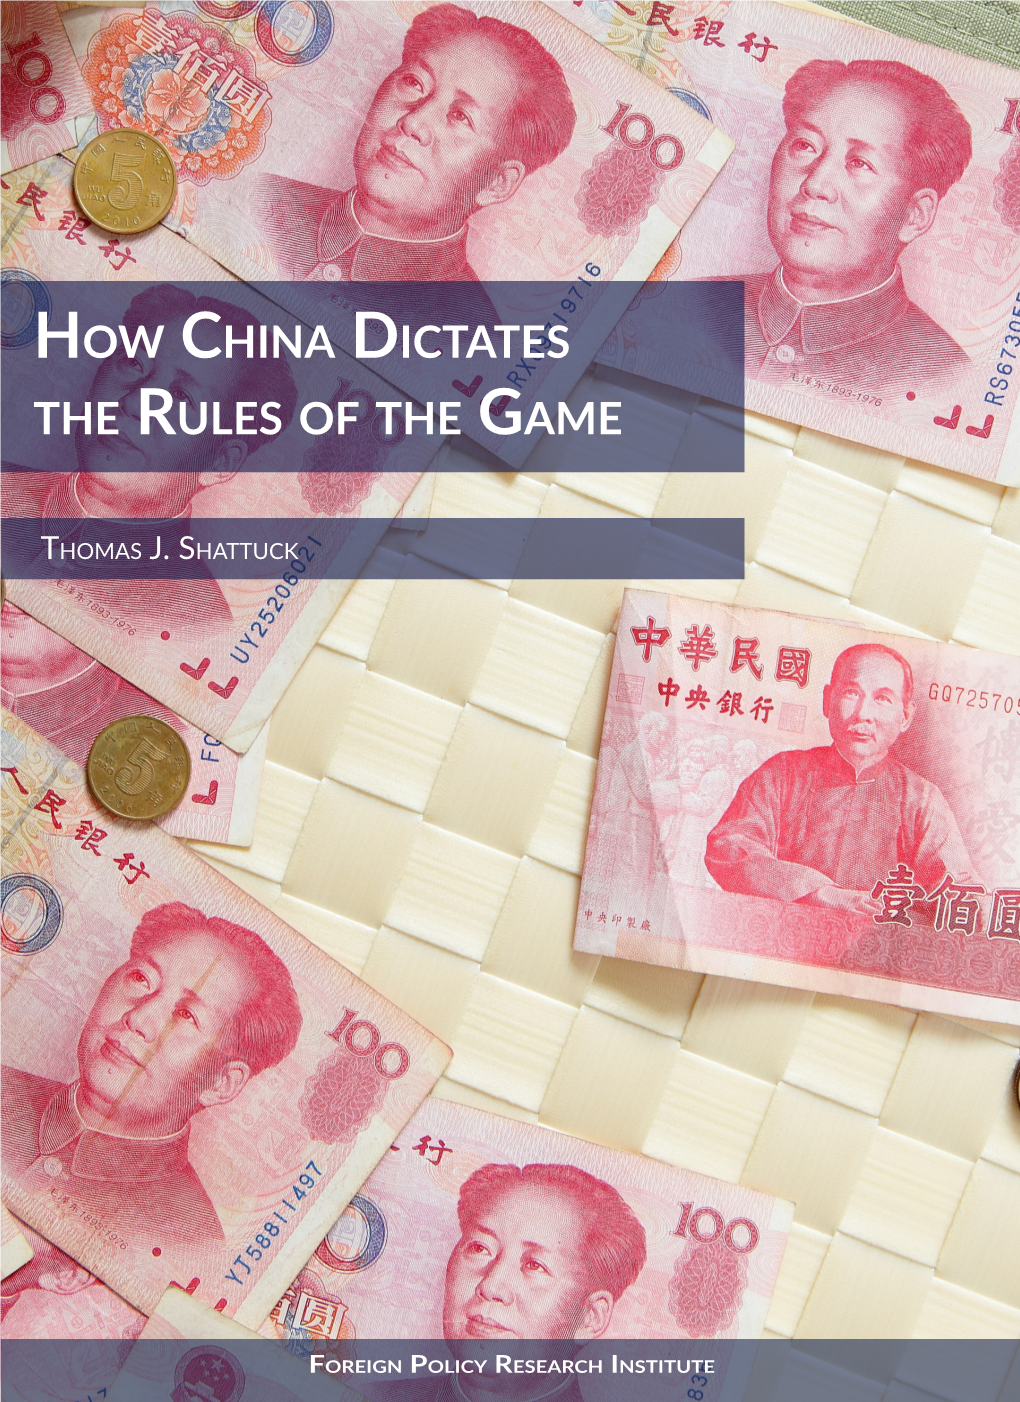 How China Dictates the Rules of the Game